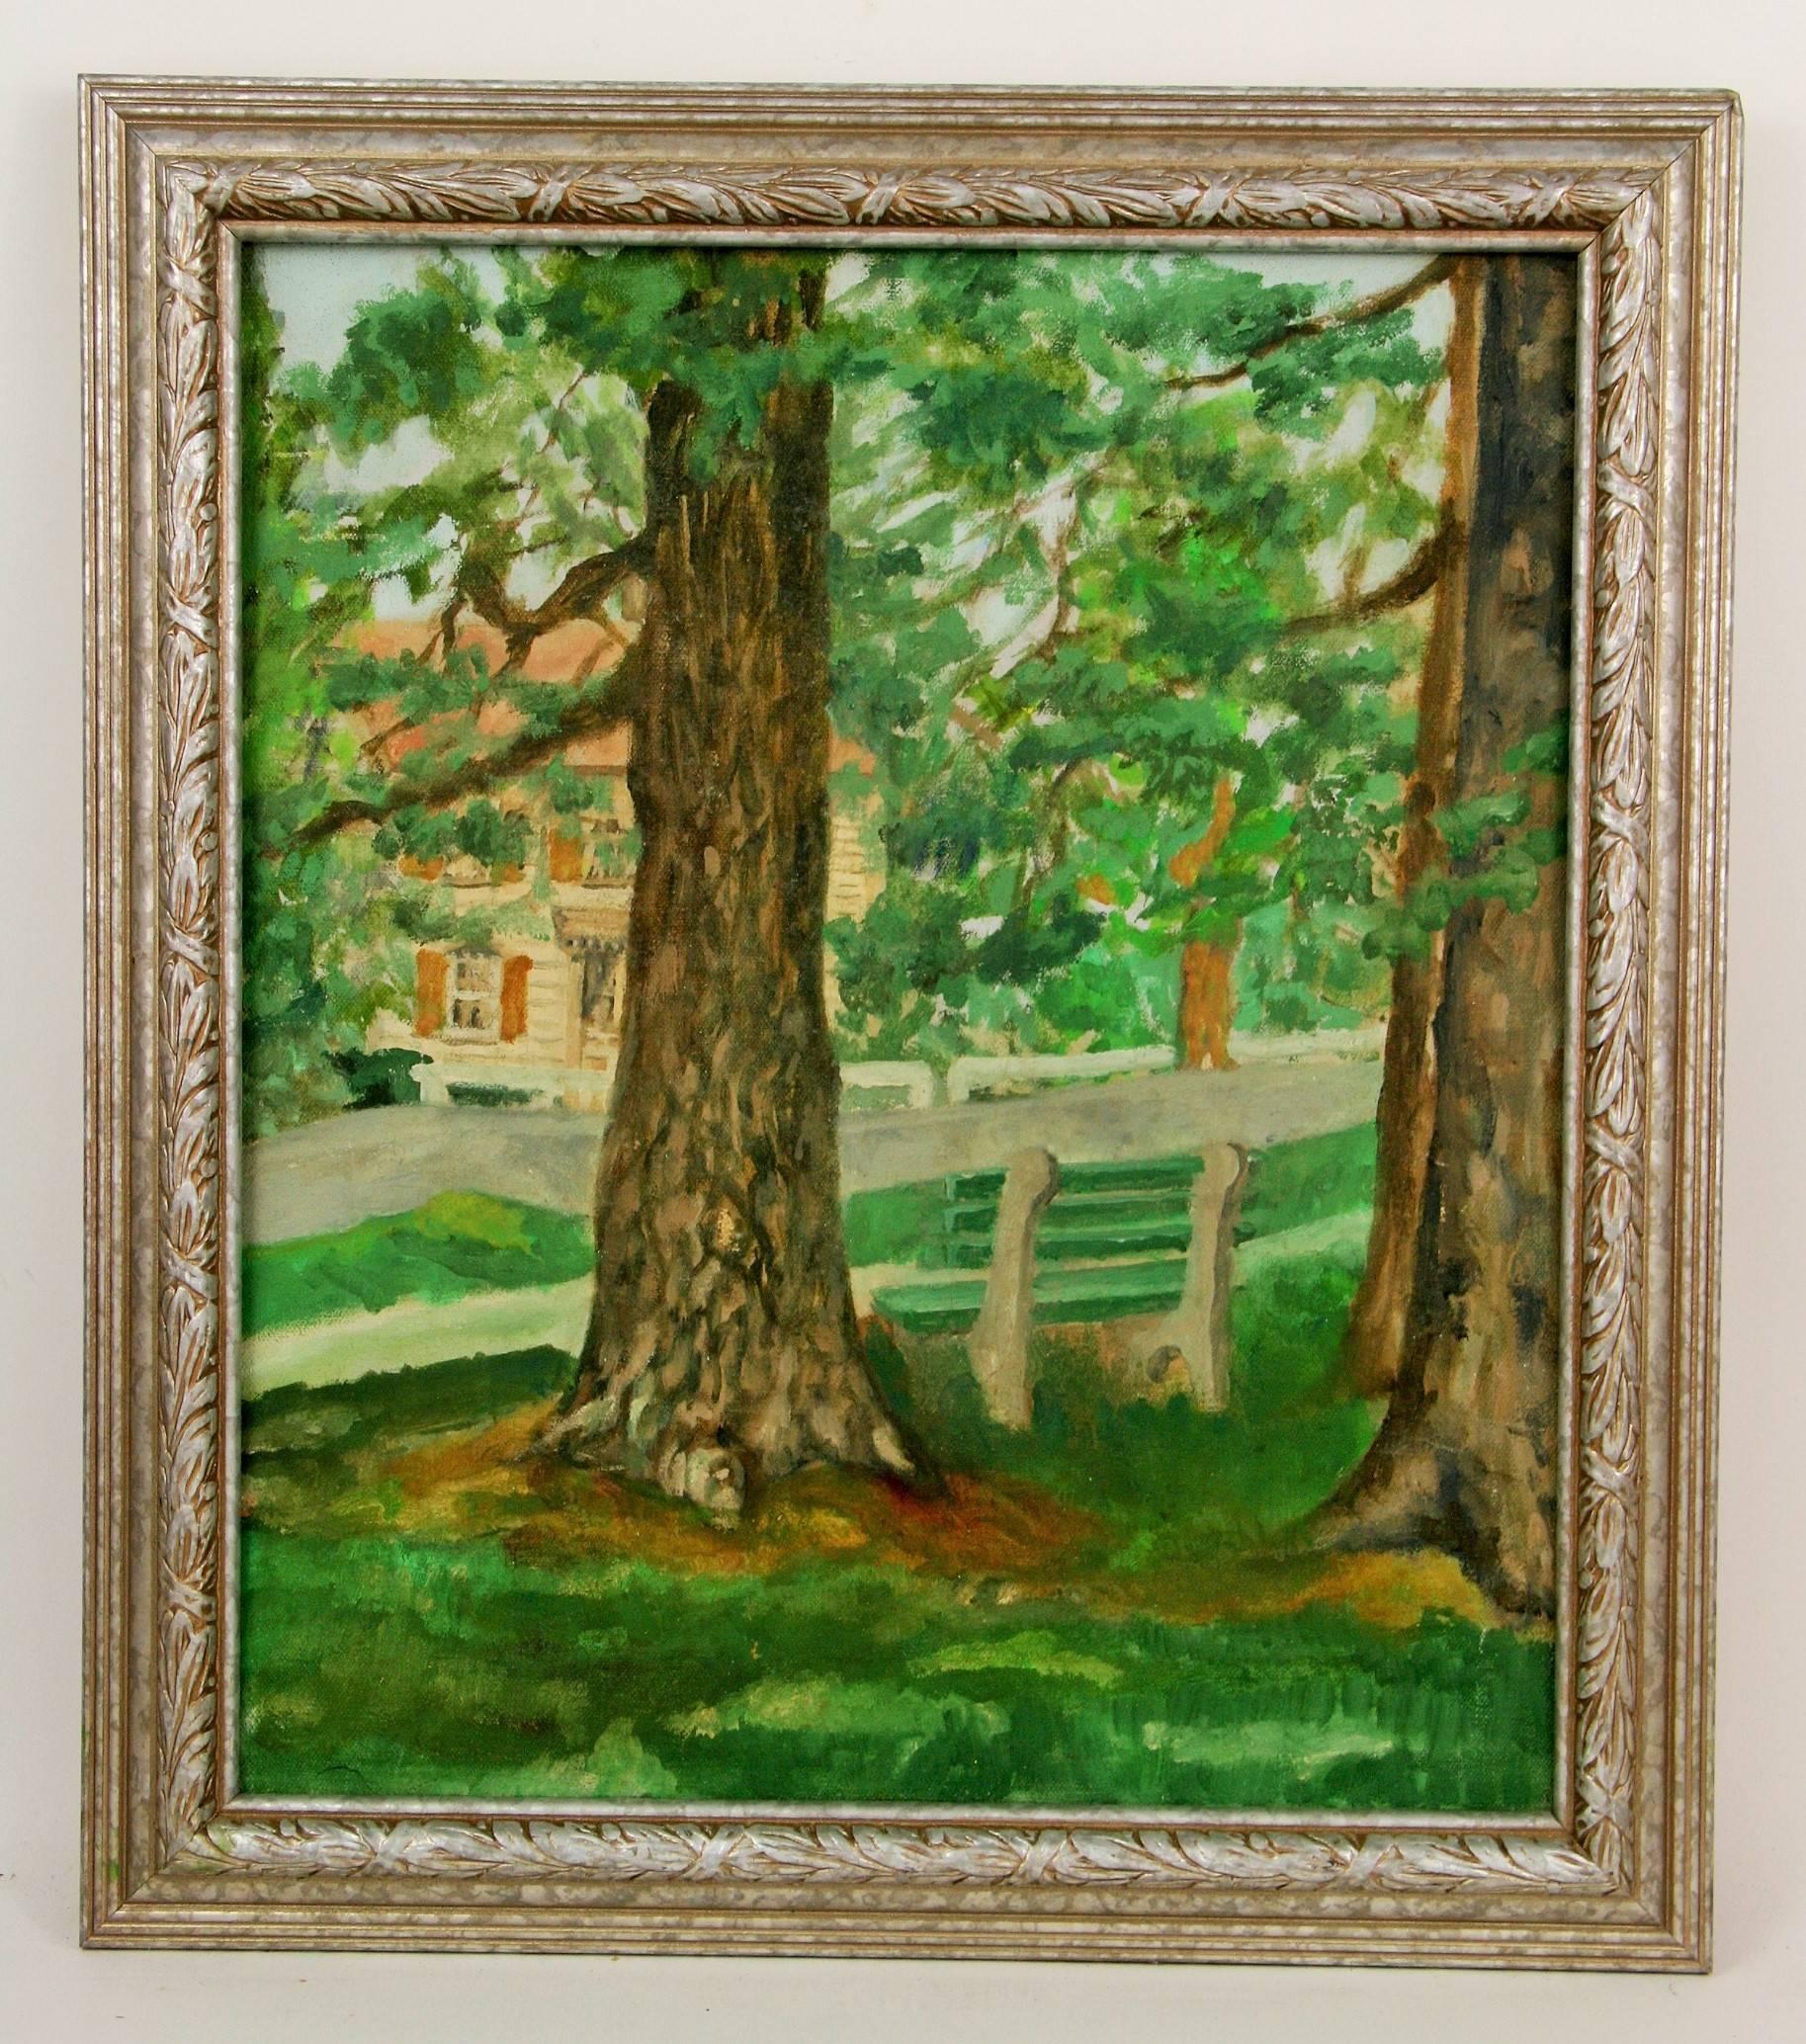  Impressionist Landscape Painting Through The Trees  1